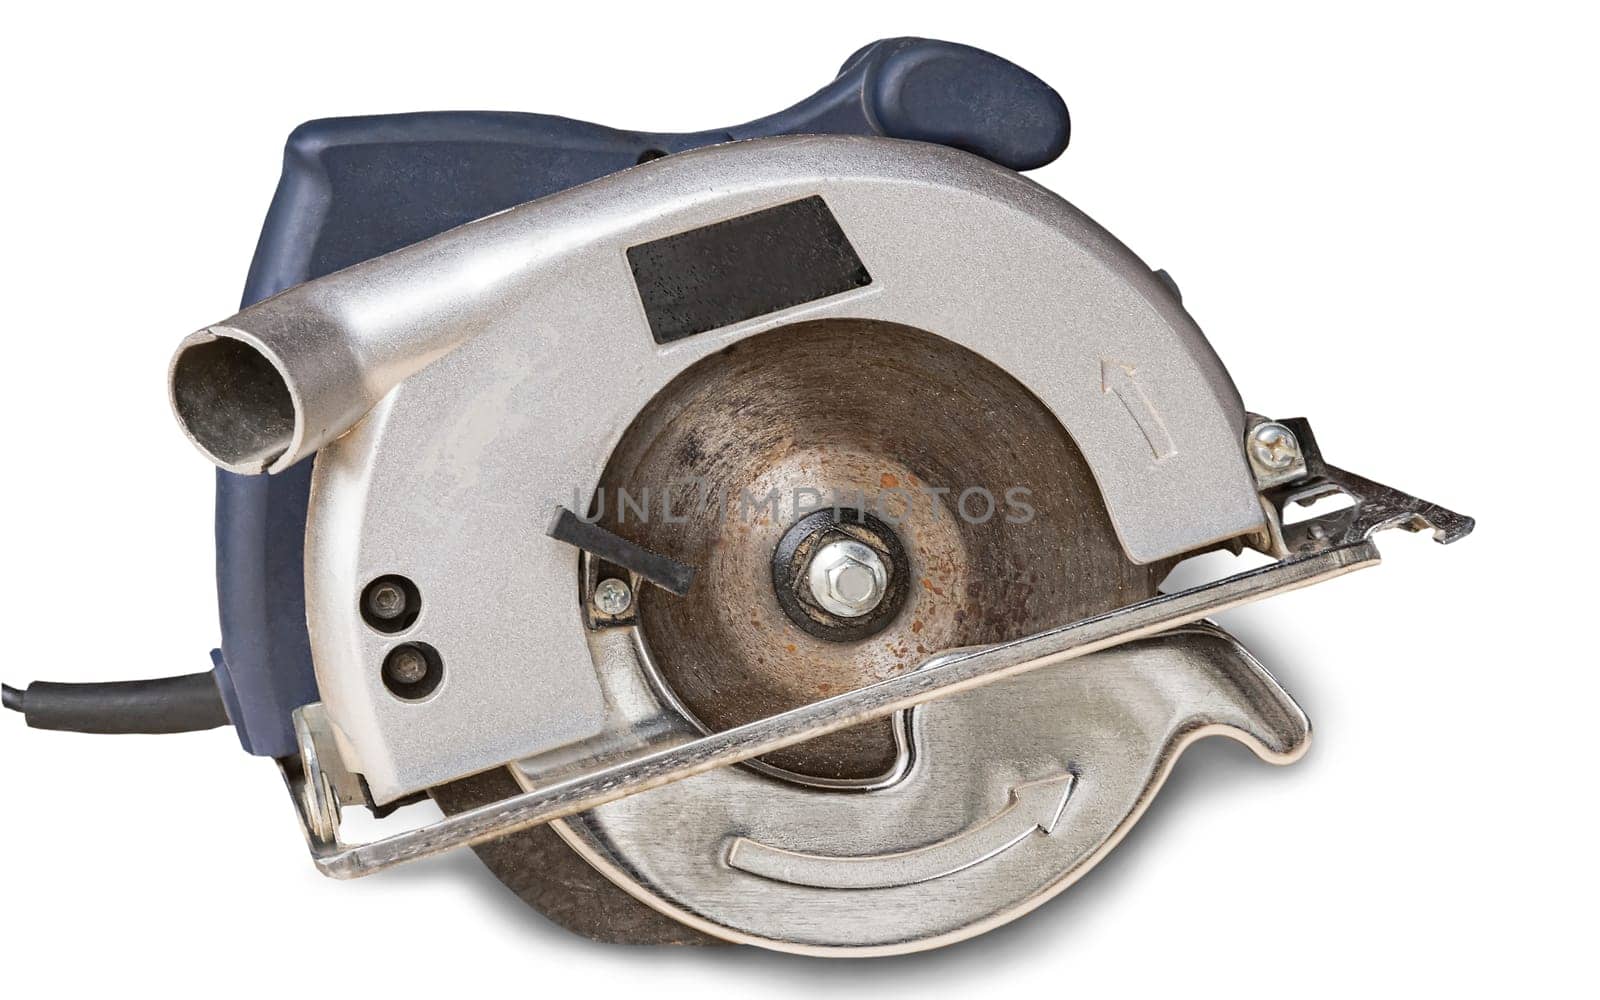 A small electric circular saw on white background.